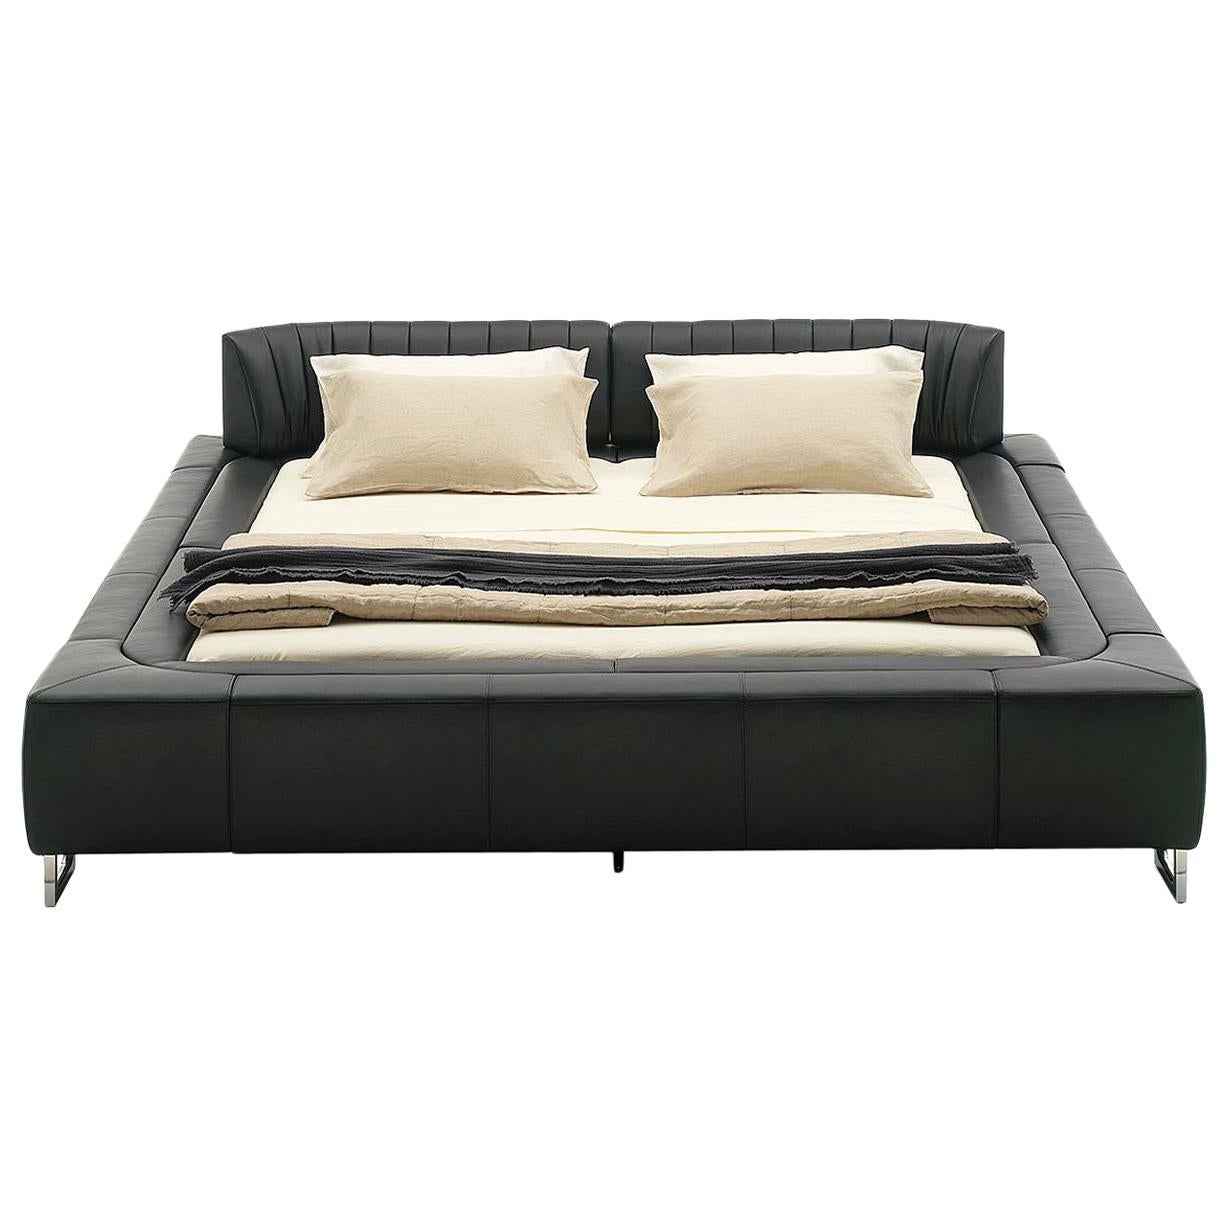 Desede DS-1165 King Size Bed in Leather by Hugo De Ruiter